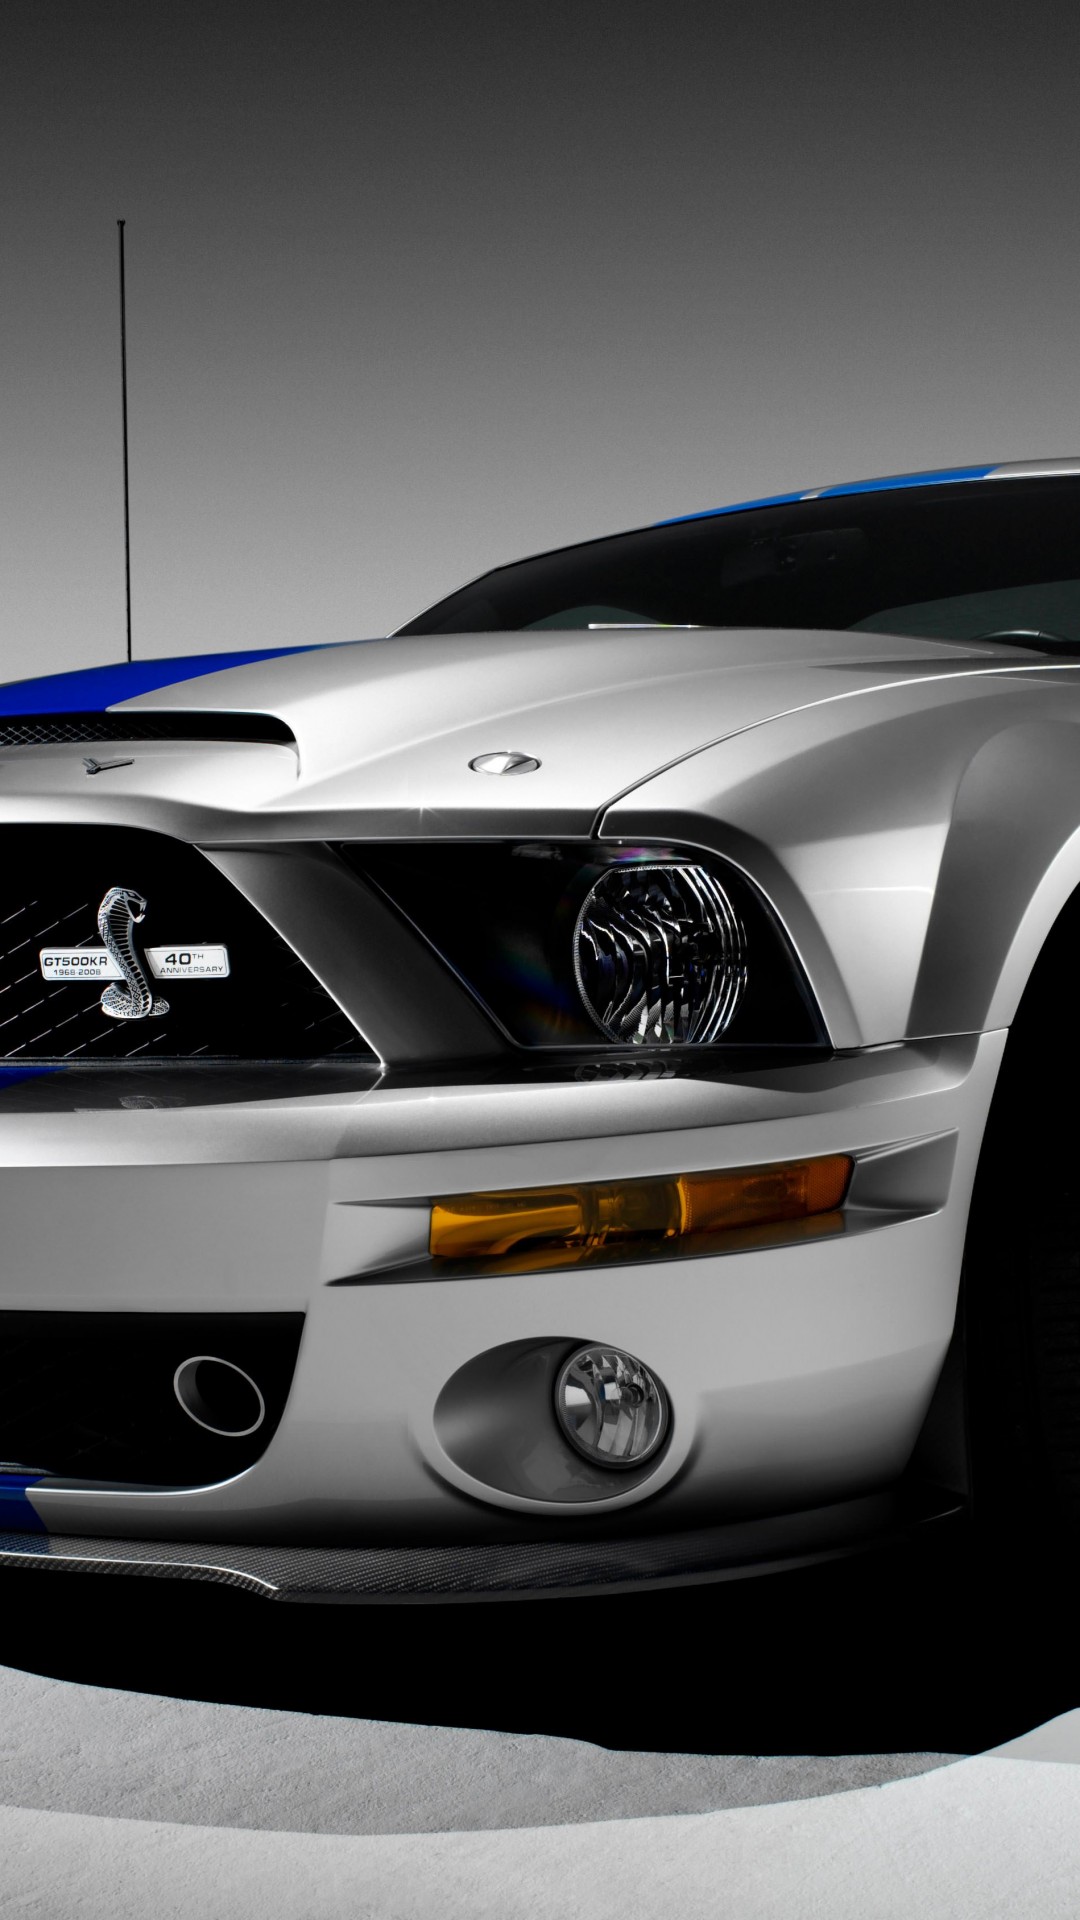 Shelby Mustang GT500KR Wallpaper for SONY Xperia Z1